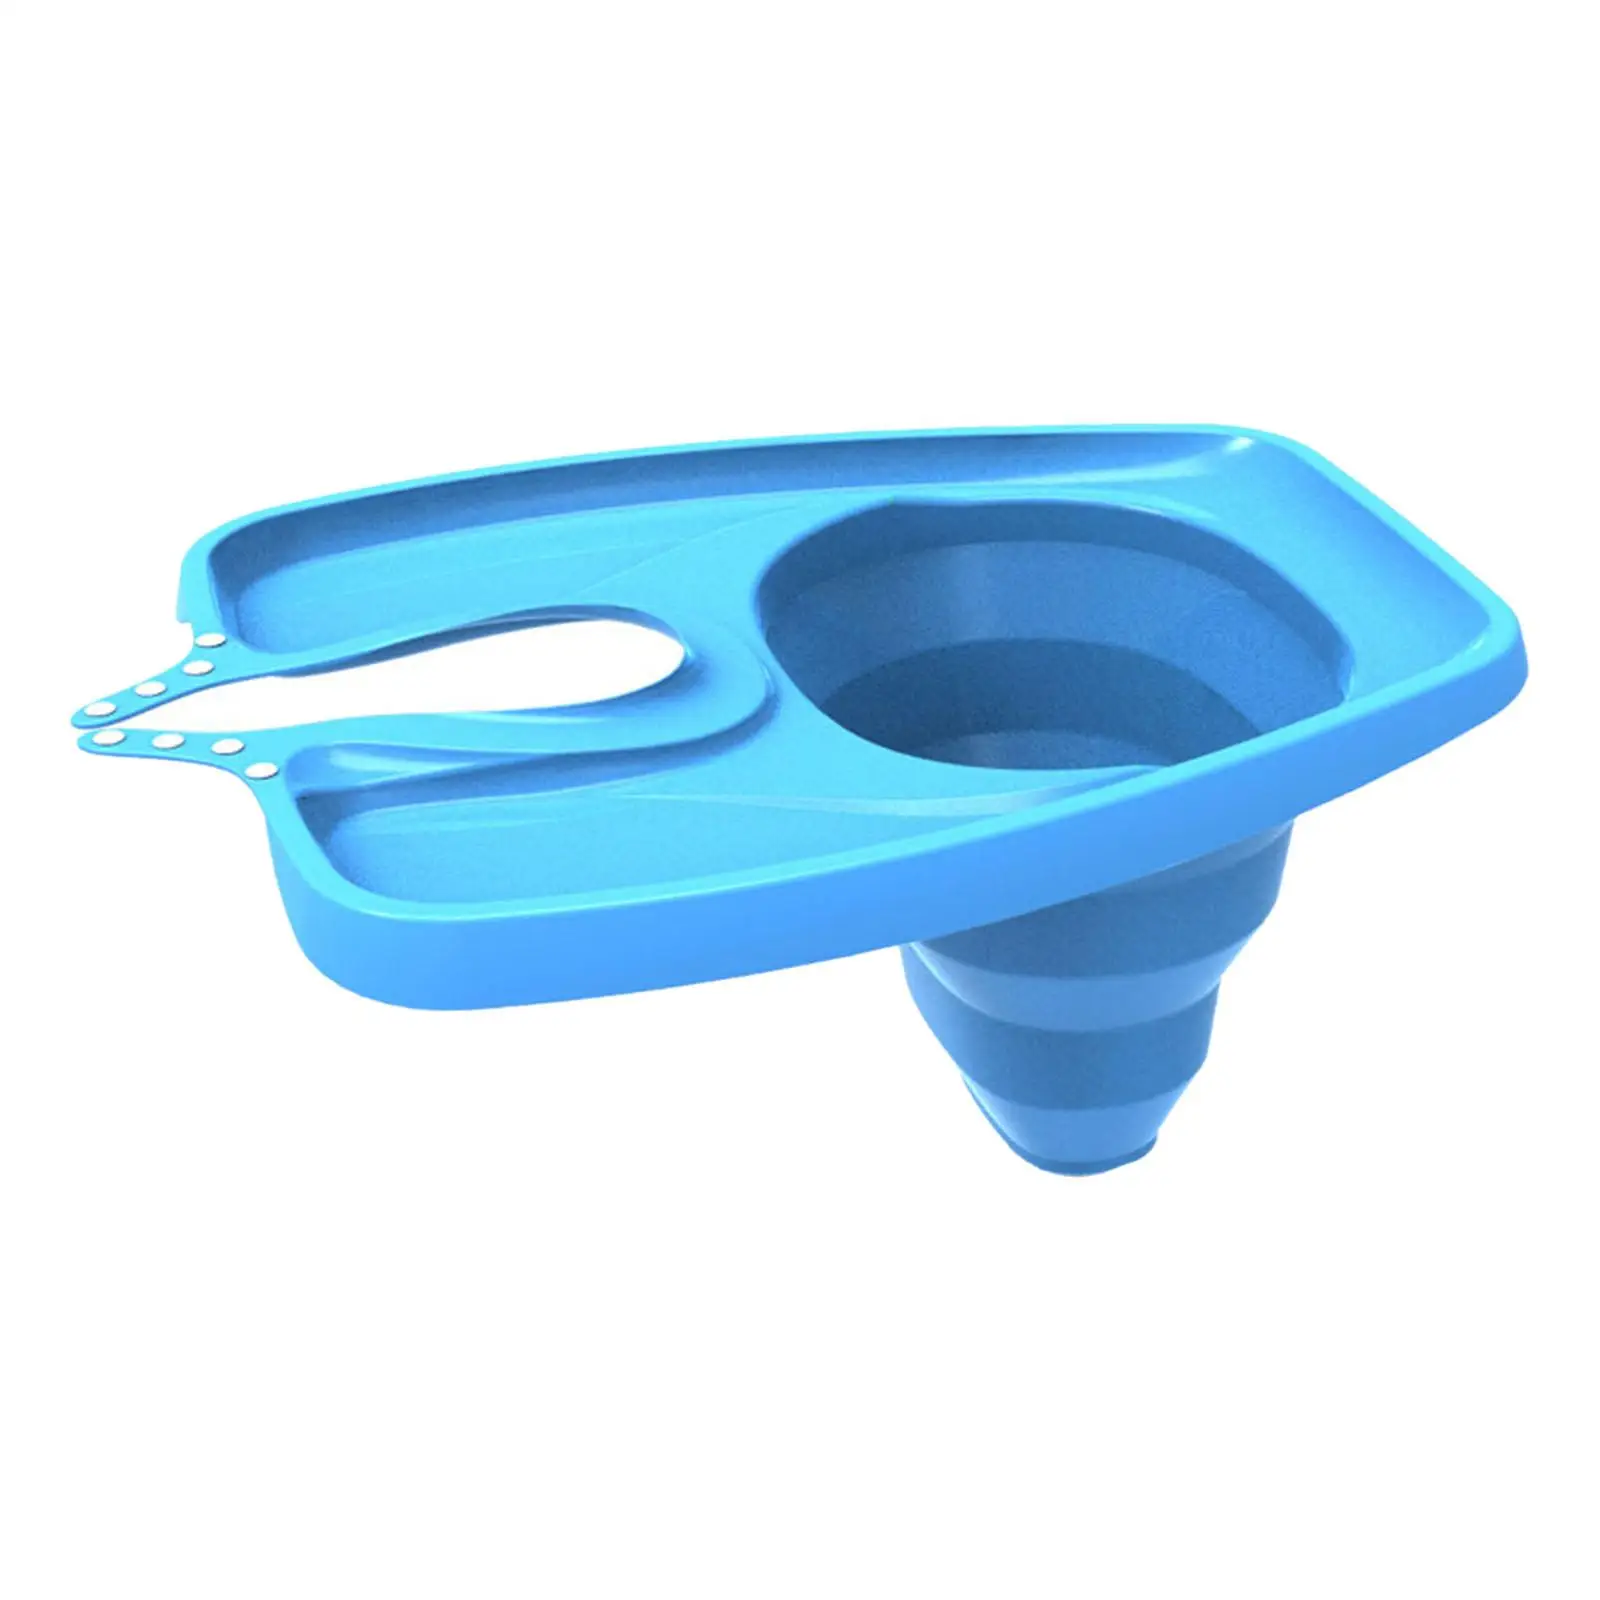 Hanging Hair Washing Basin Tray Foldable Ergonomics TPE Shampoo Sink Mobile Tray for Hair Salon SPA Wheelchair Pregnant Disabled